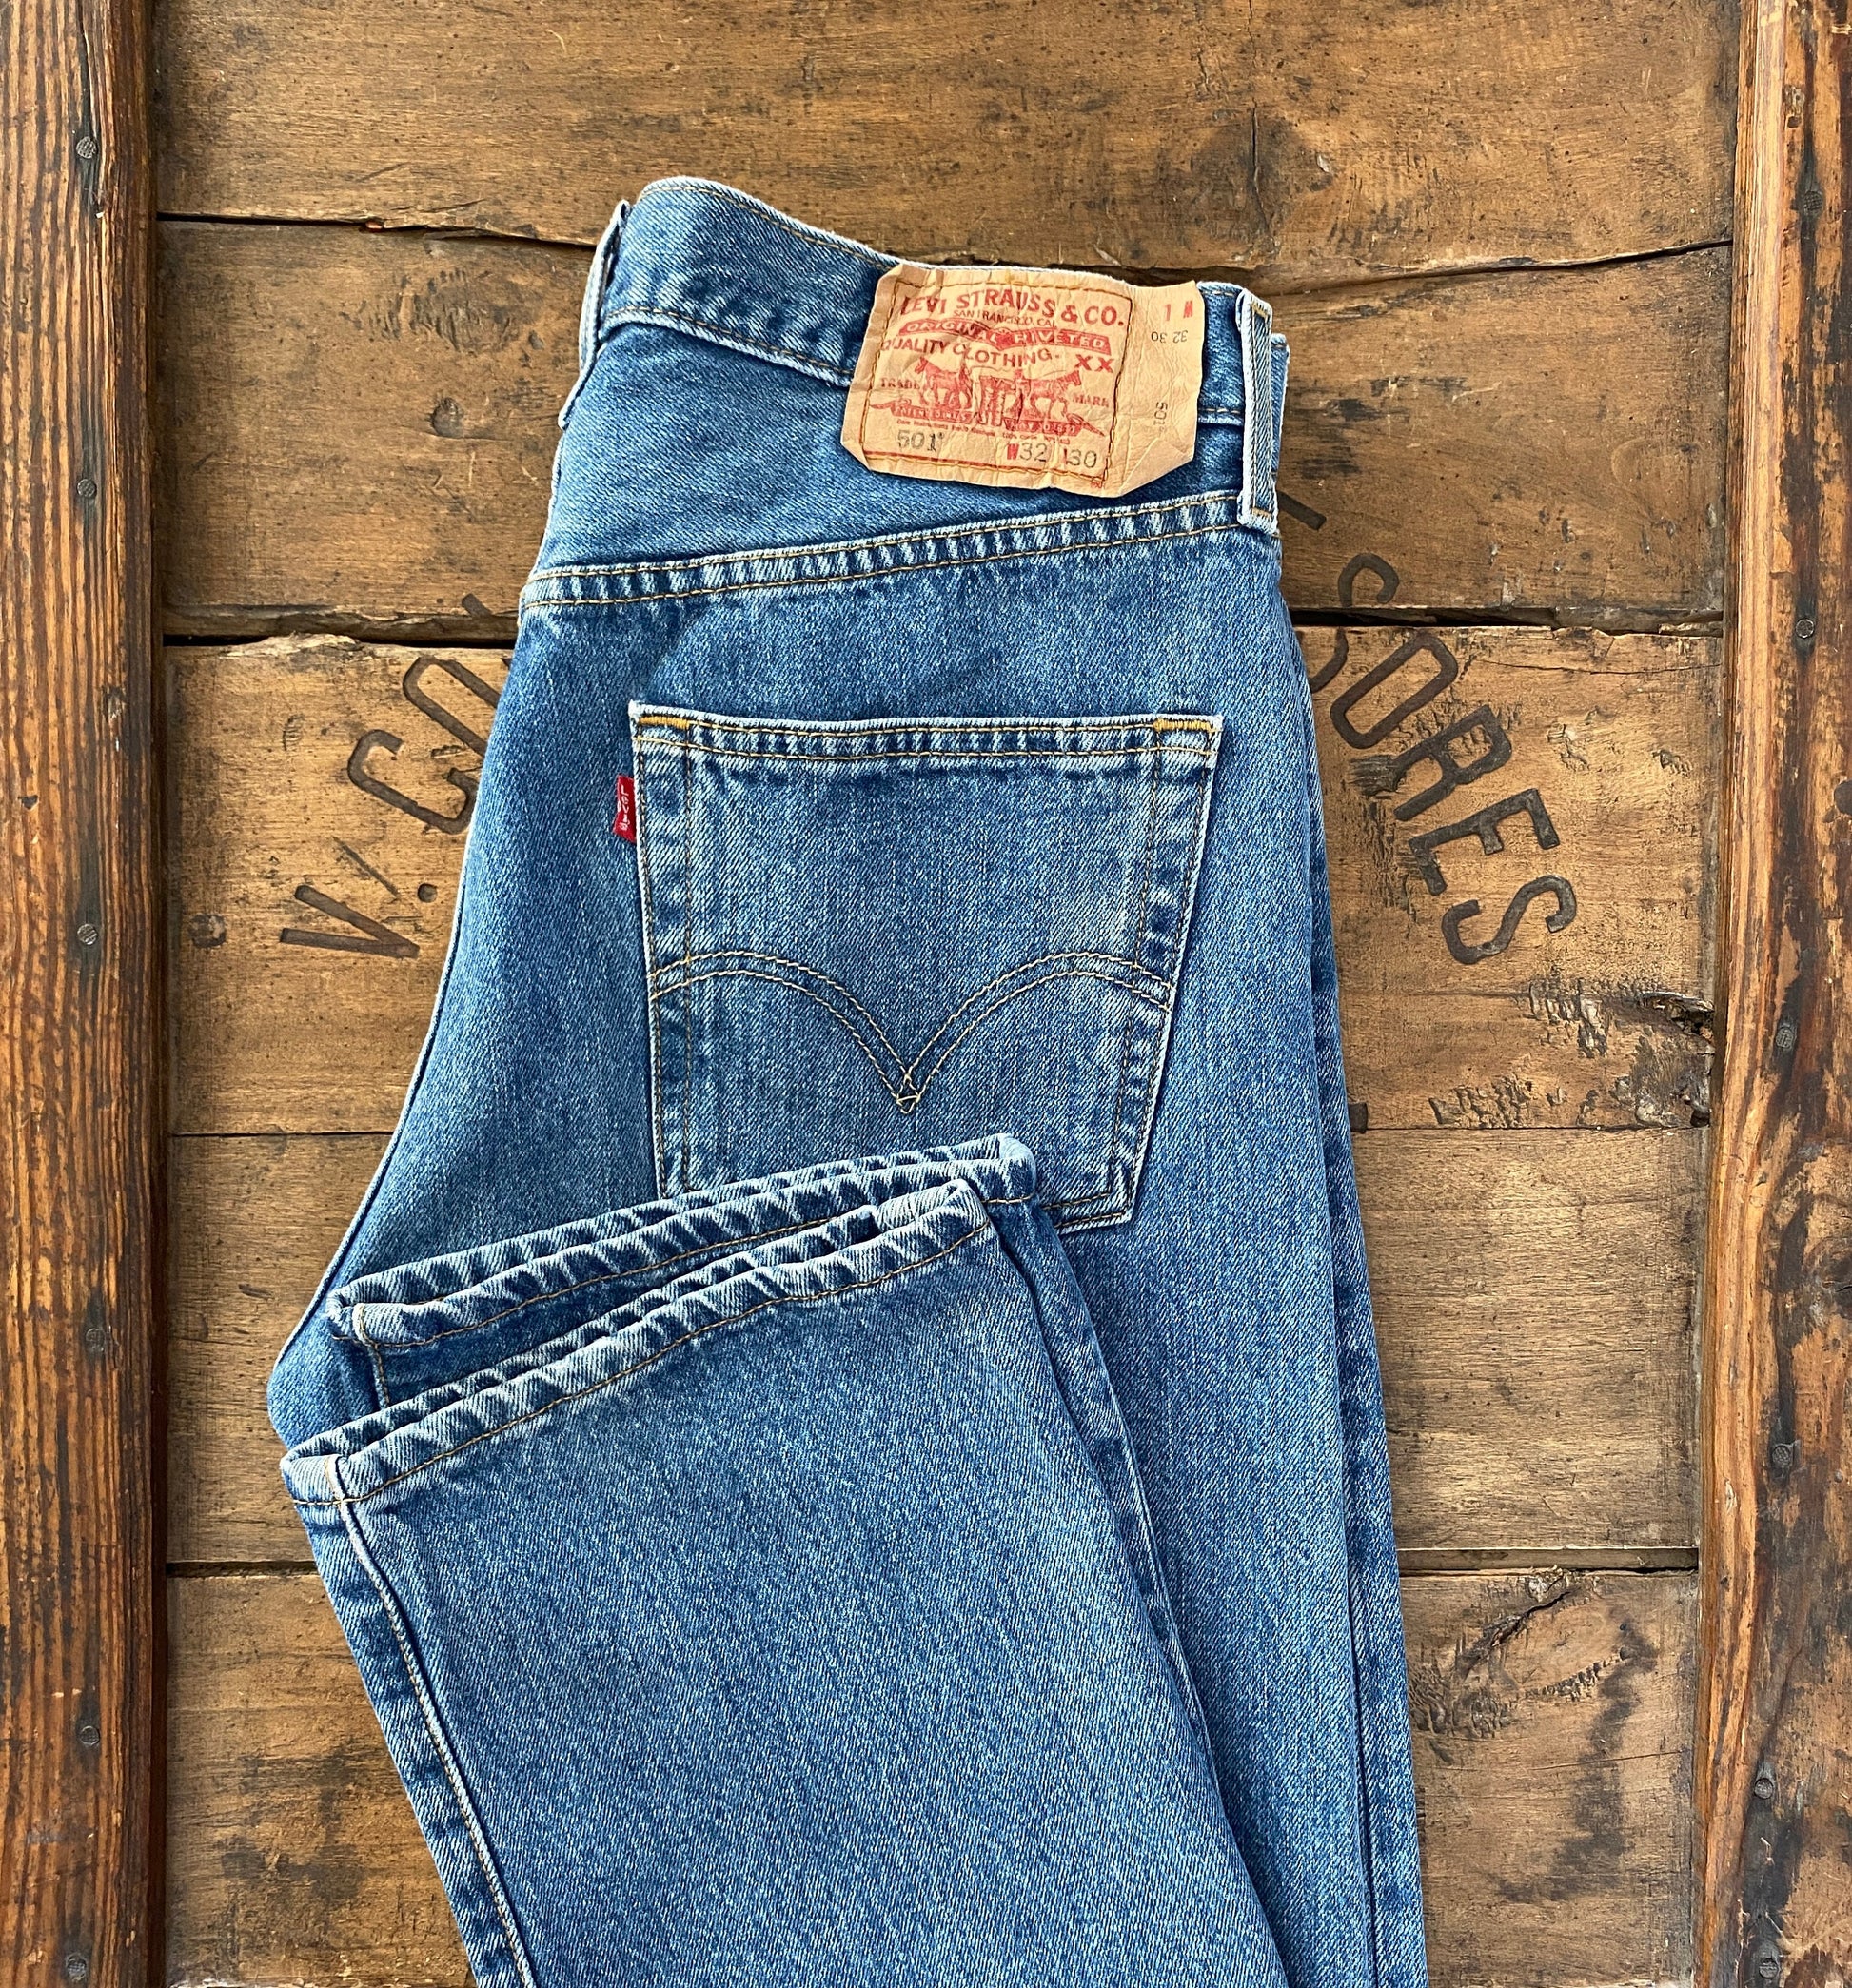 Discover timeless style with these Vintage Levi's 501 jeans, expertly crafted in Colombia. Embrace authenticity and heritage with the iconic Levi's brand, renowned for quality and durability. These jeans feature a classic fit in size 32x30, blending comfort and style effortlessly. Elevate your wardrobe with a piece of denim history. Shop now and experience the allure of vintage Levi's.